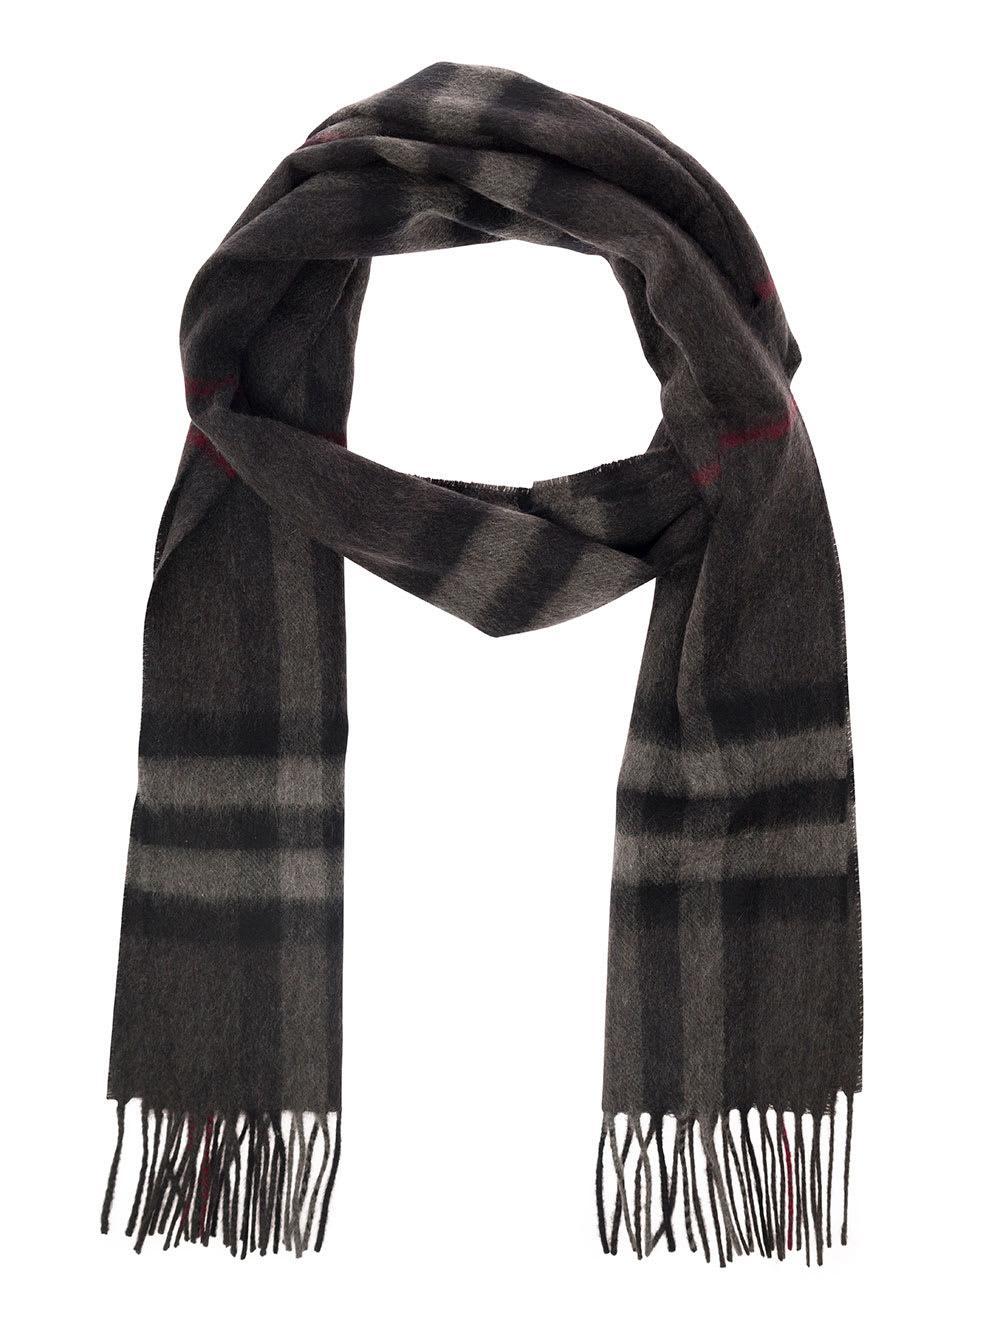 Burberry - Men - Fringed Checked Wool and Cashmere-Blend Scarf Gray